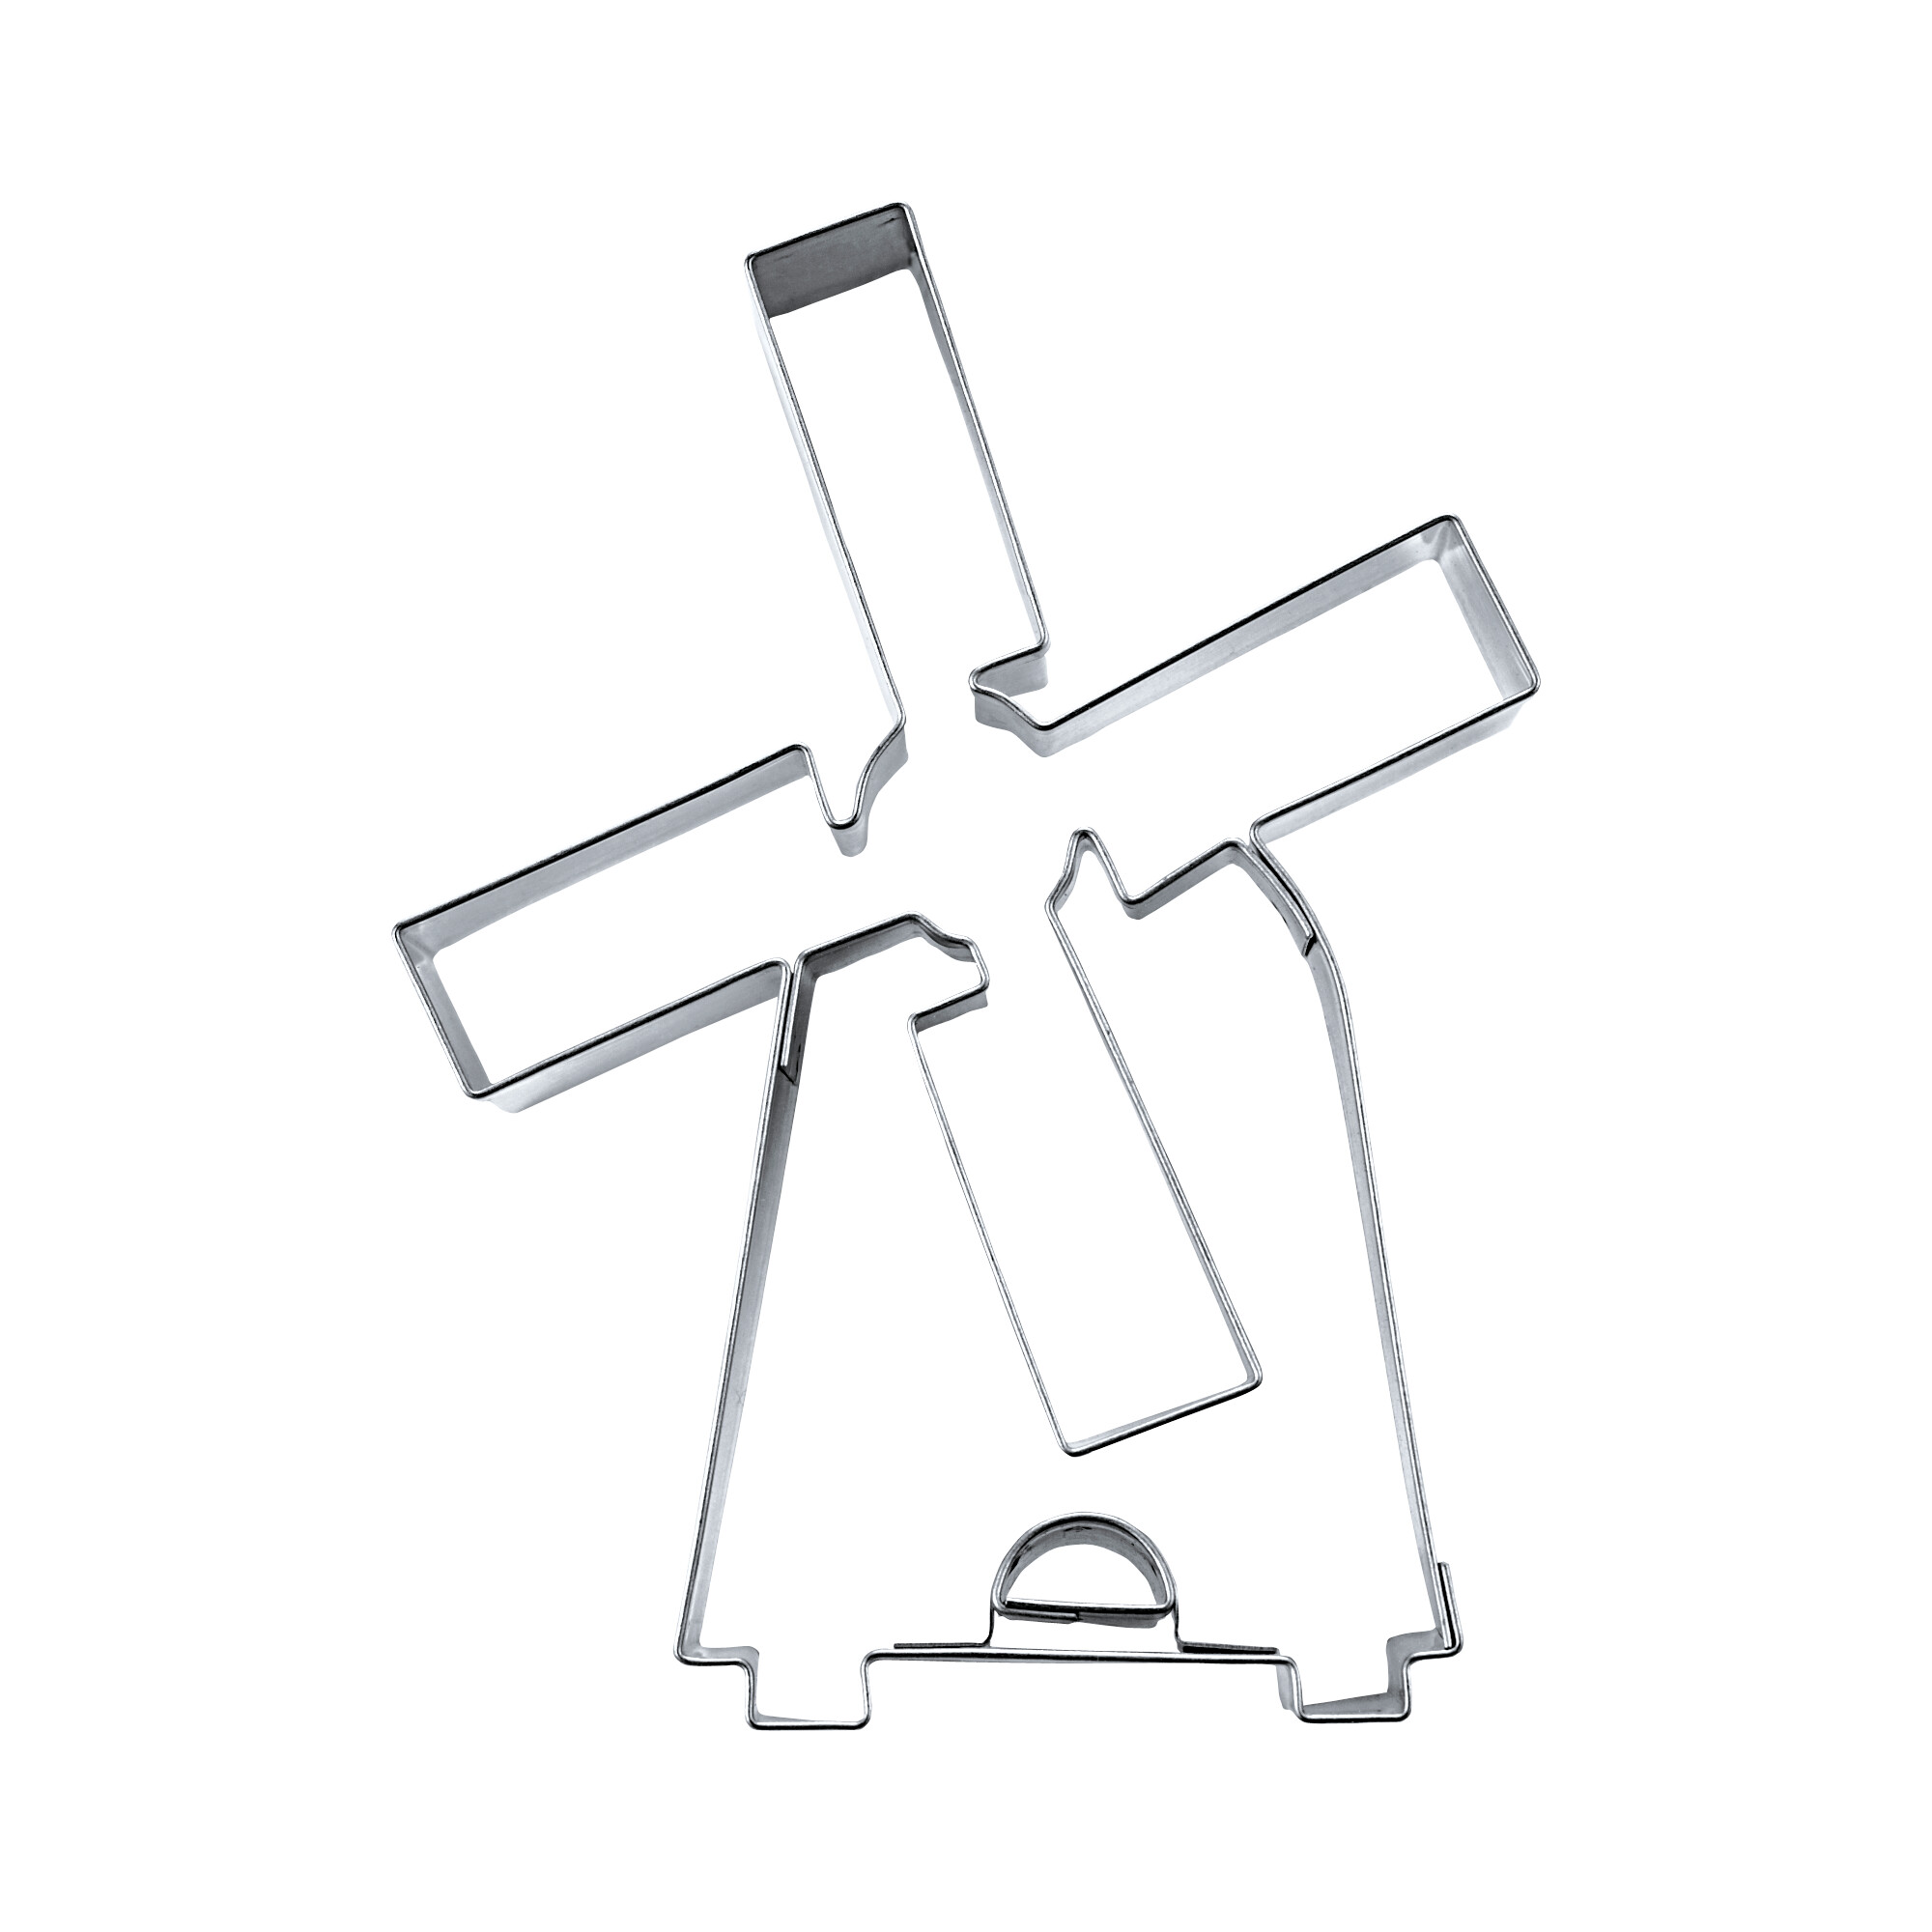 Cookie cutter with stamp – Windmill